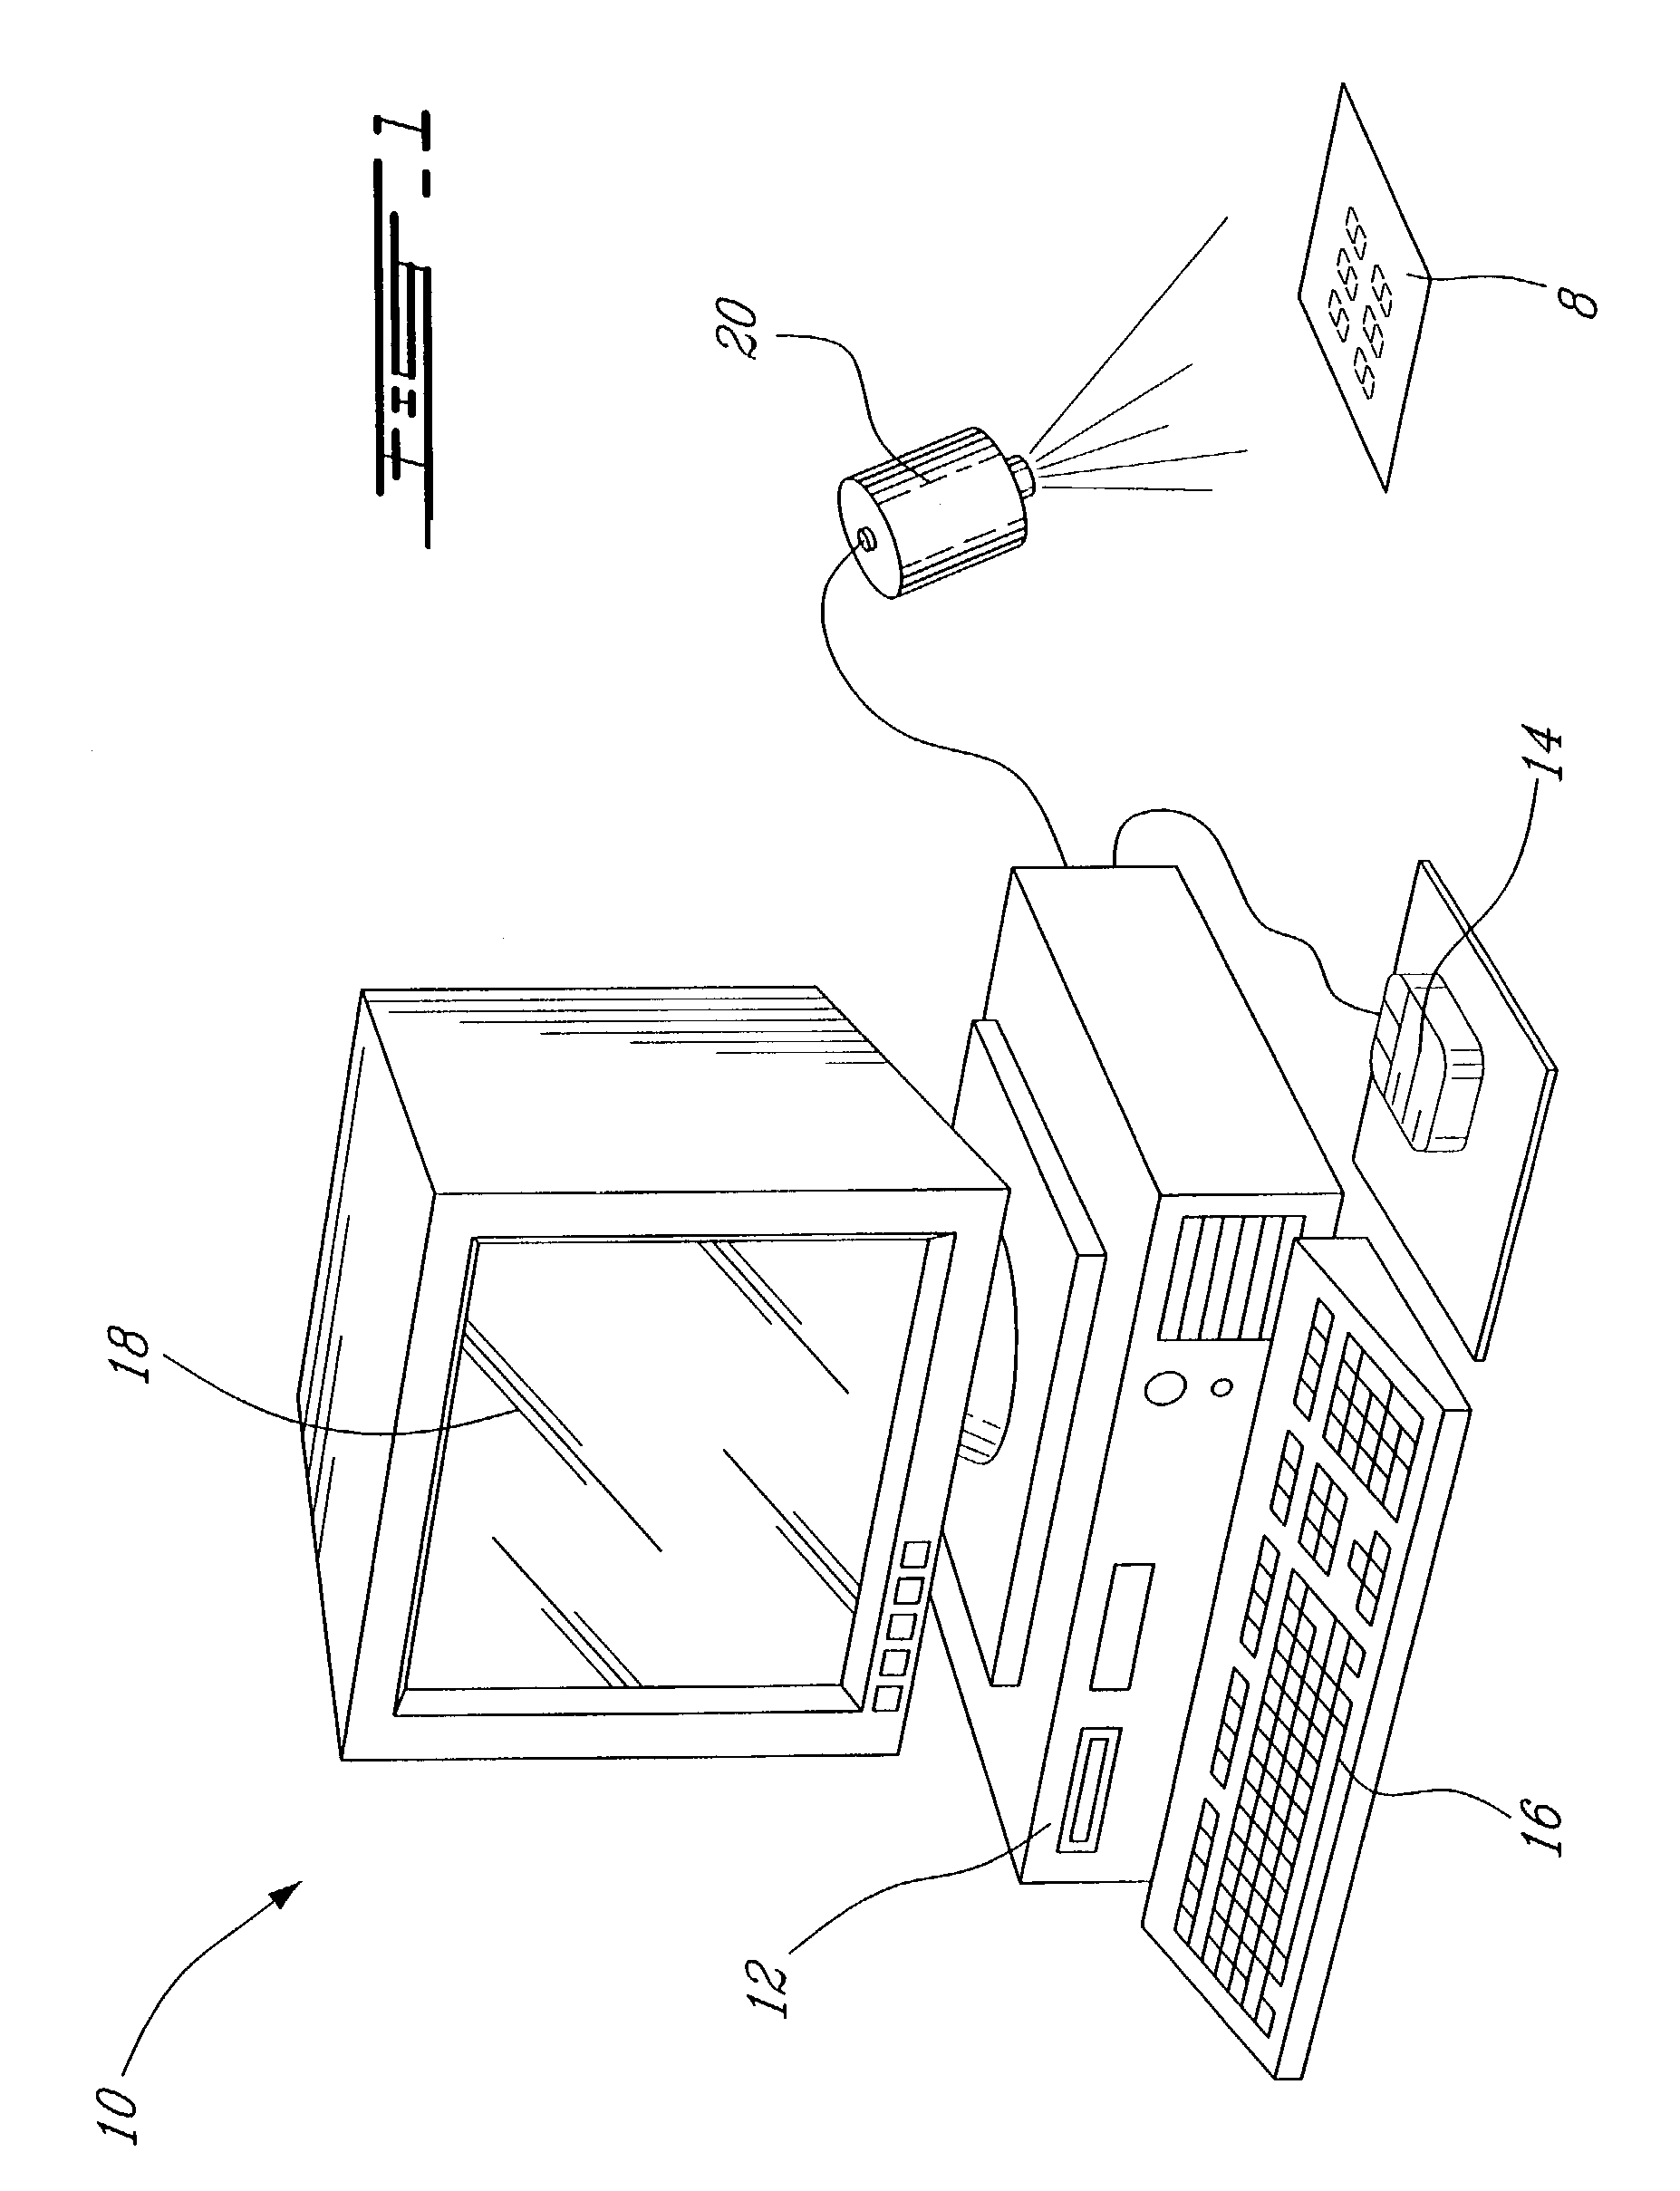 Character recognition system and method